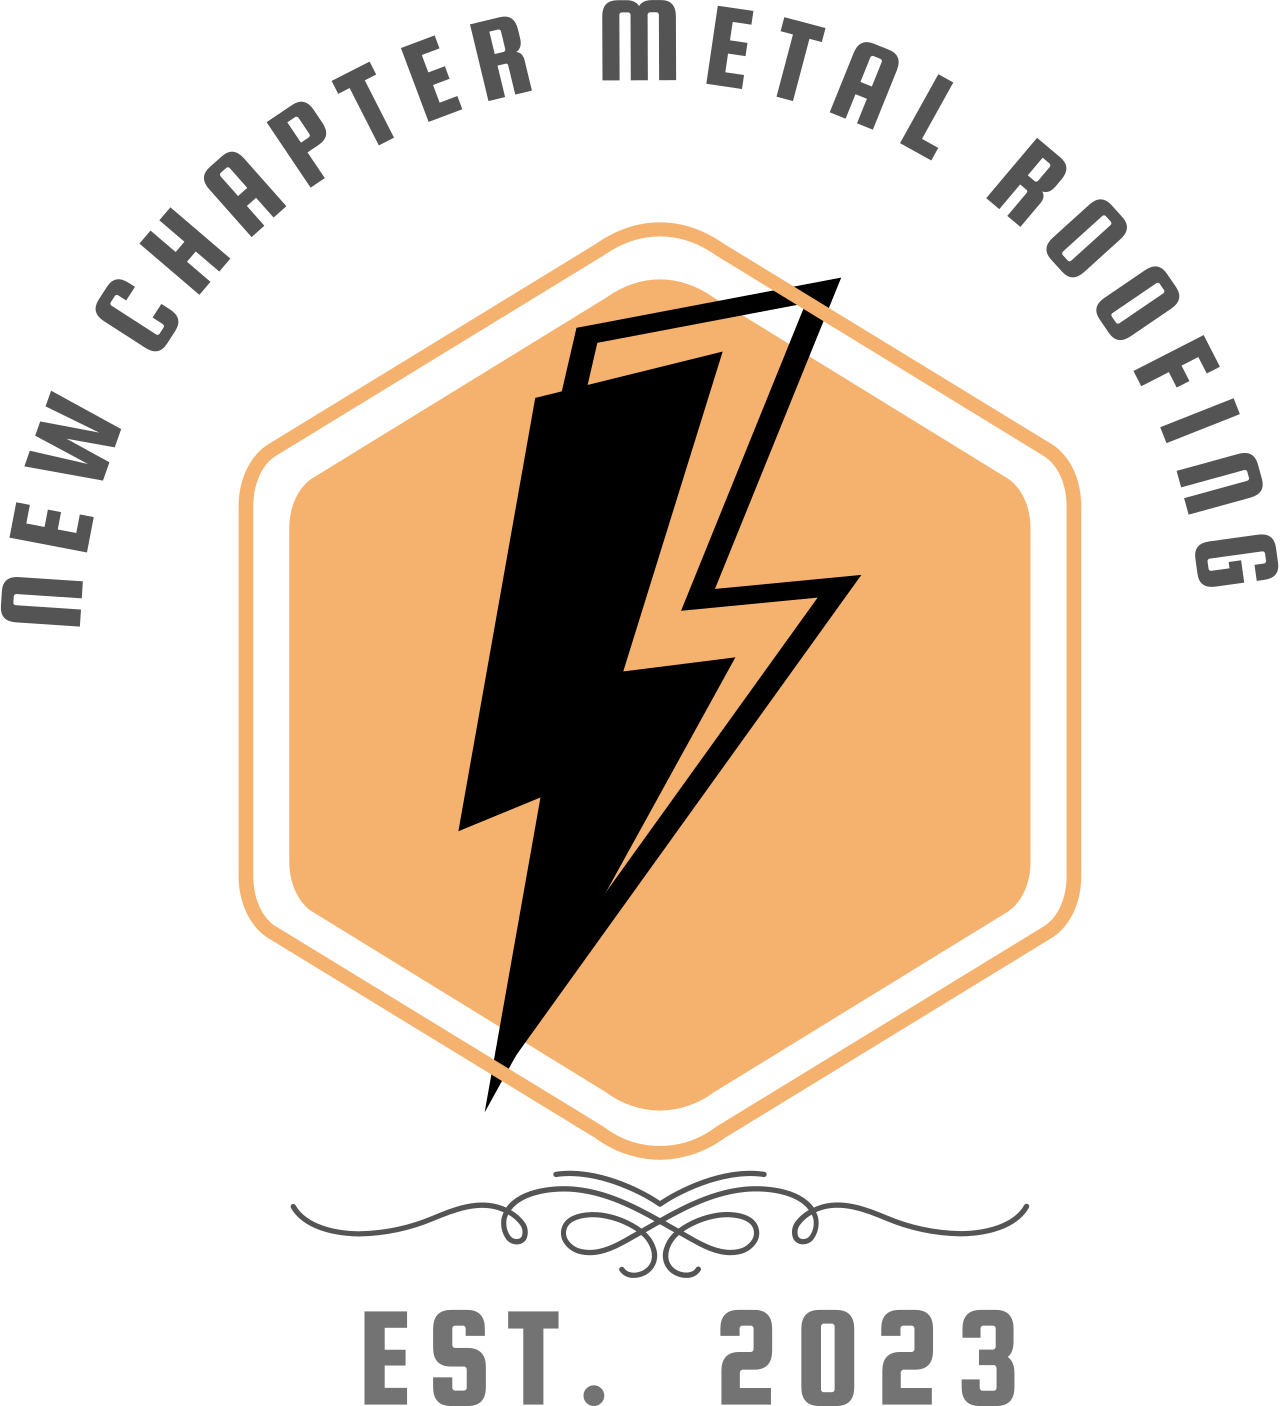 NEW CHAPTER METAL ROOFING 's logo